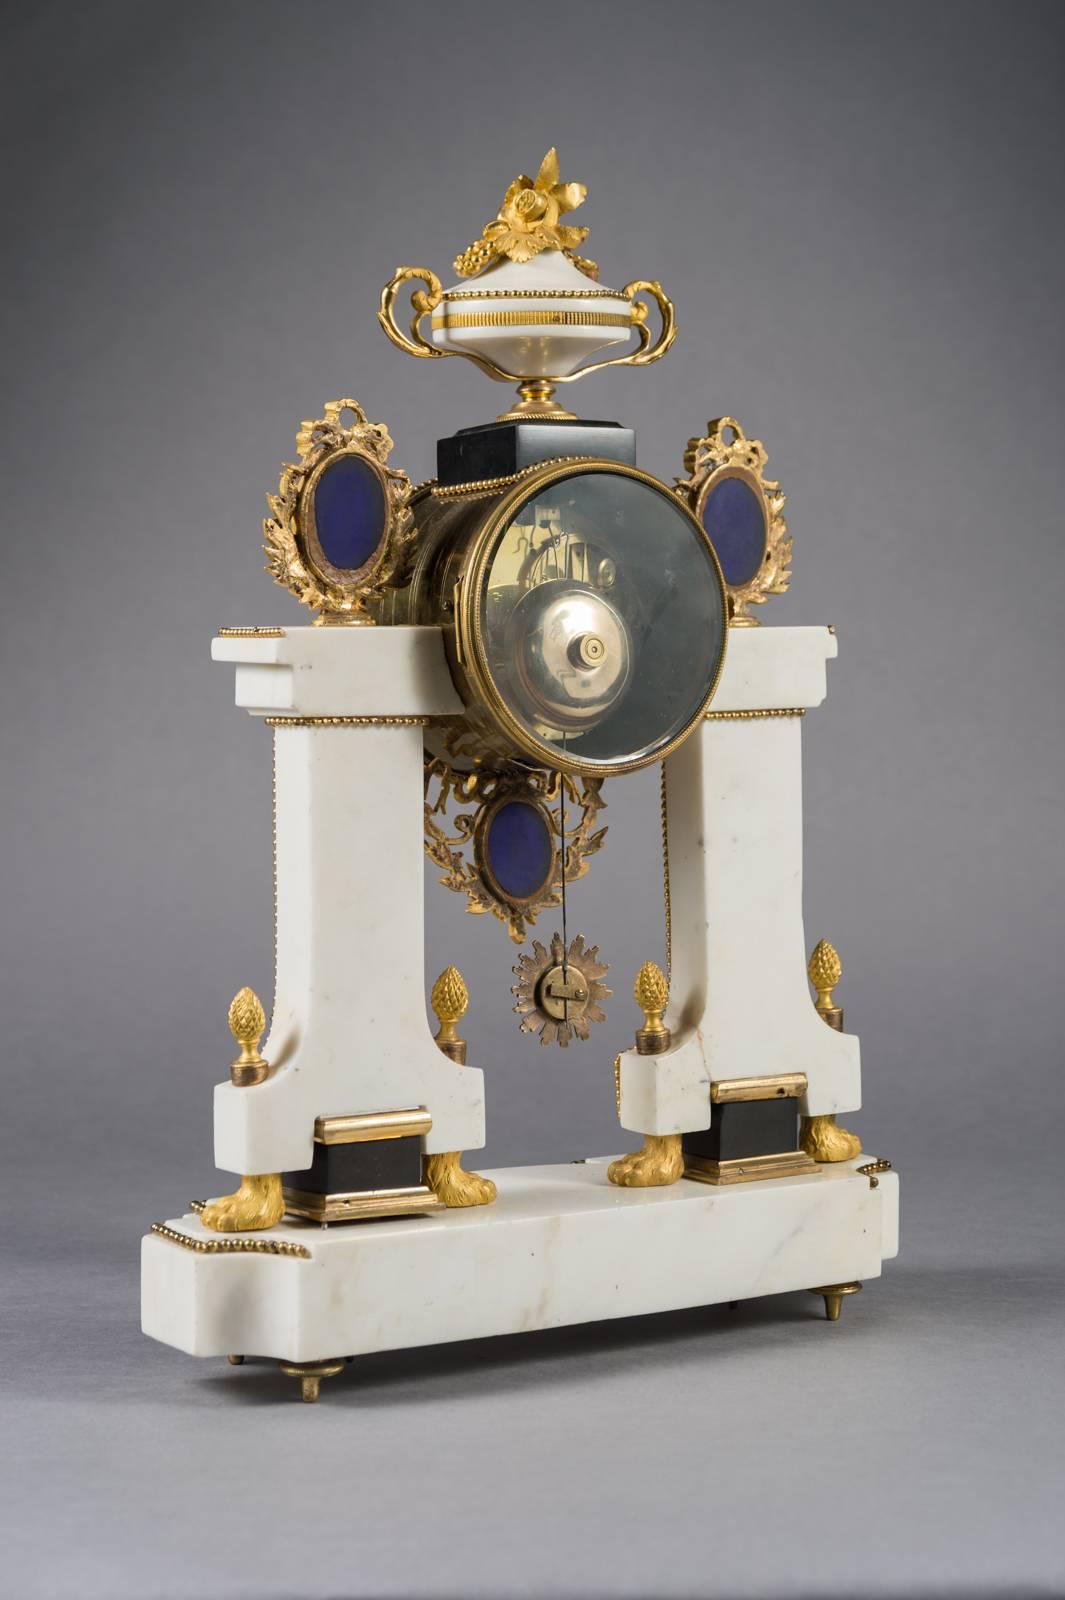 A Louis XVI ormolu-mounted black and white marble mantel clock by Thiéry, Paris.

Thiery Paris, late 18th century.

The drumcase containing the white enamel dial signed Thiéry à Paris, with arabic numerals, surmounted by flower-swags and a